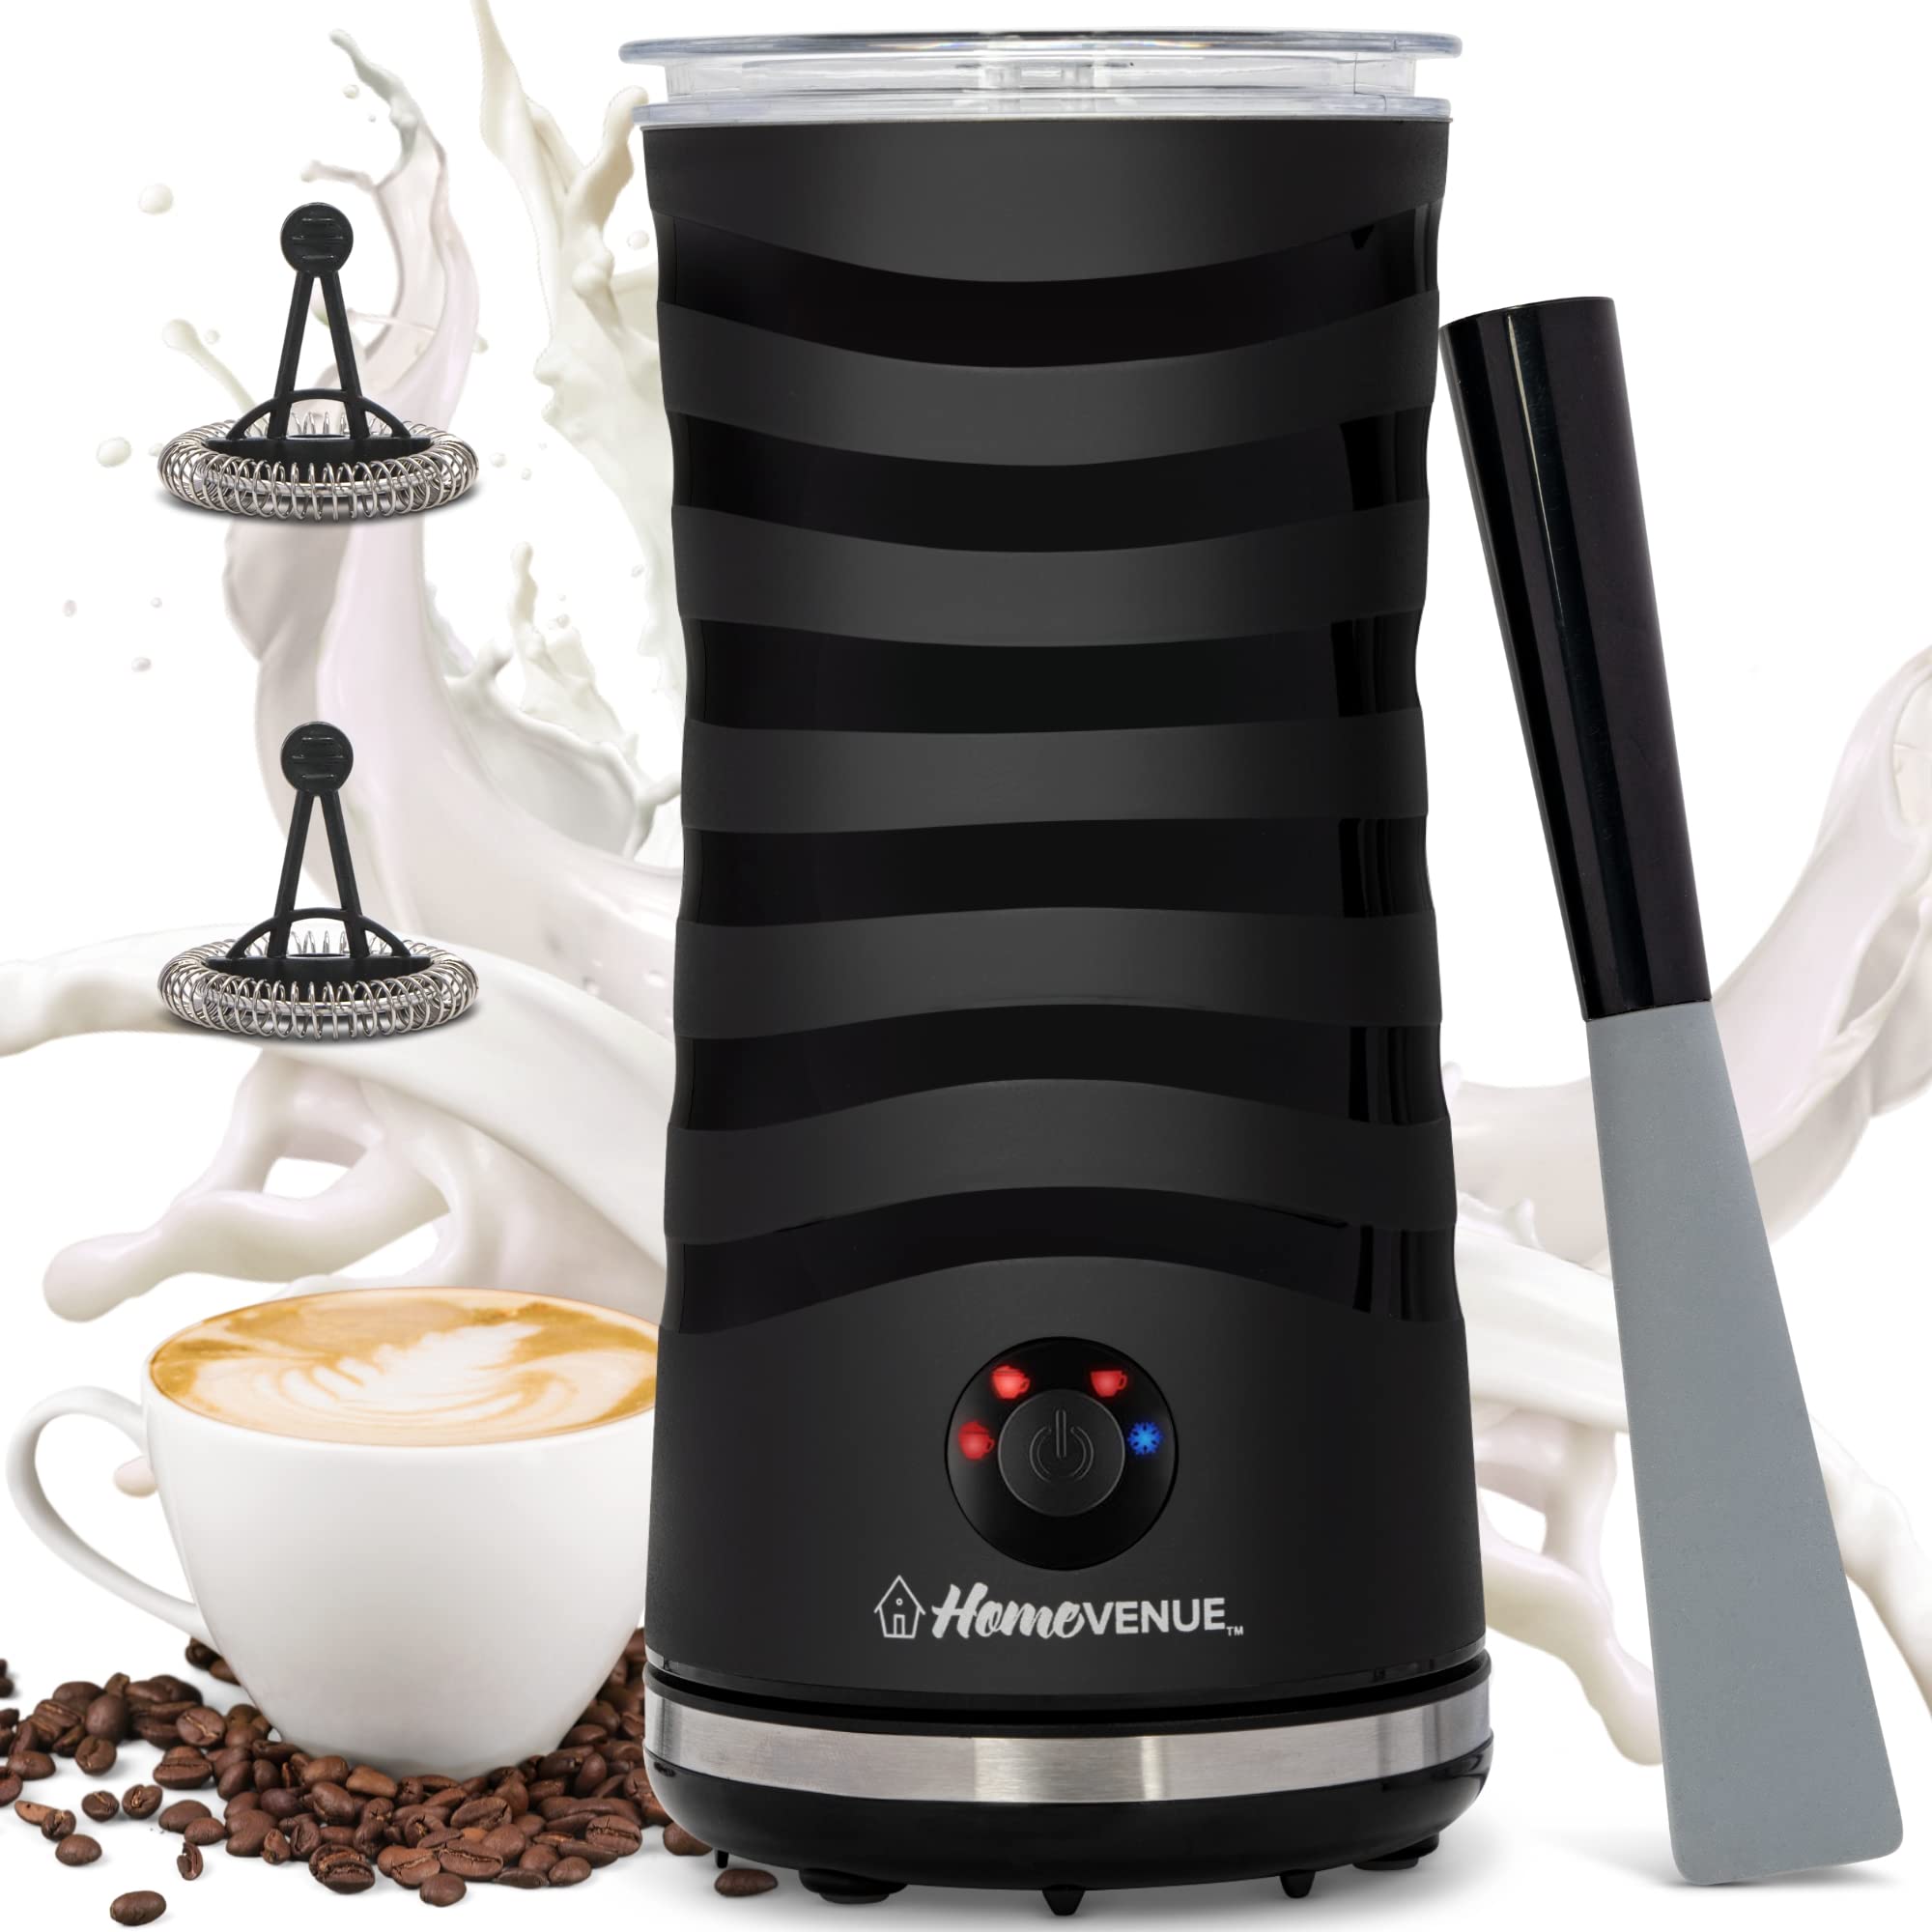 Home Venue Milk Frother